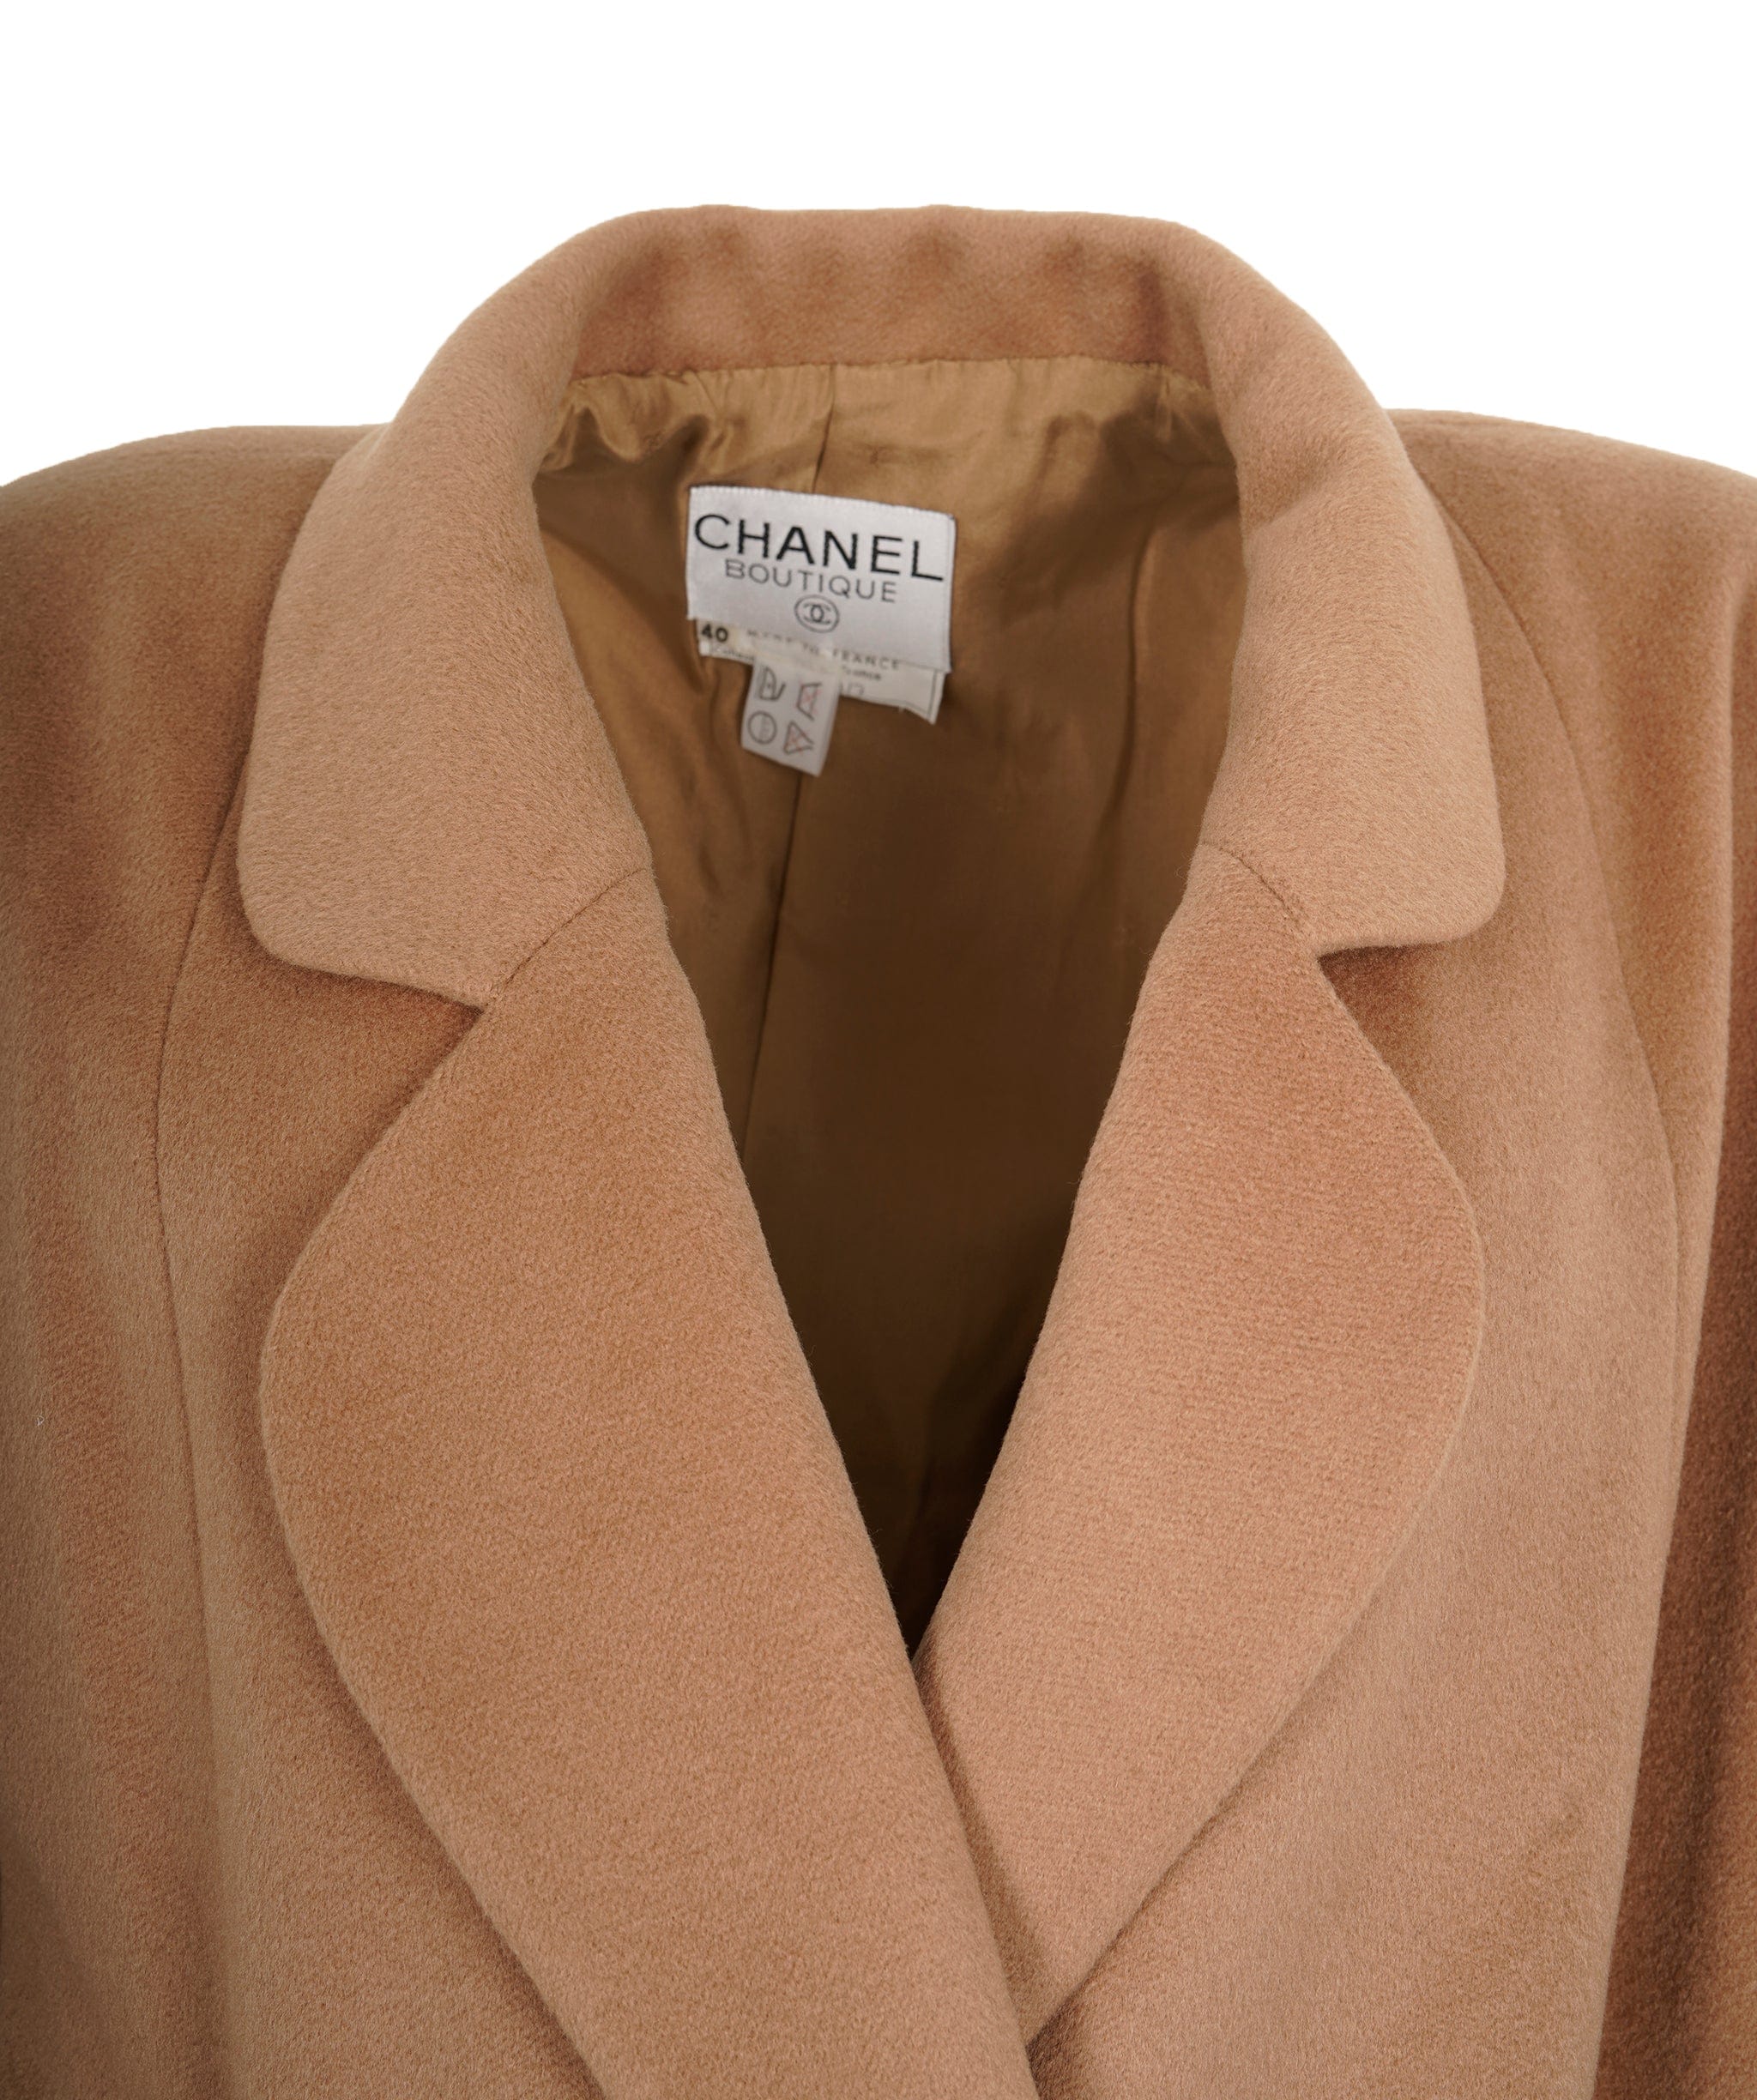 Chanel Chanel CC Logos Button Double Breasted Long Sleeve Jacket Coat Beige  ASL9222